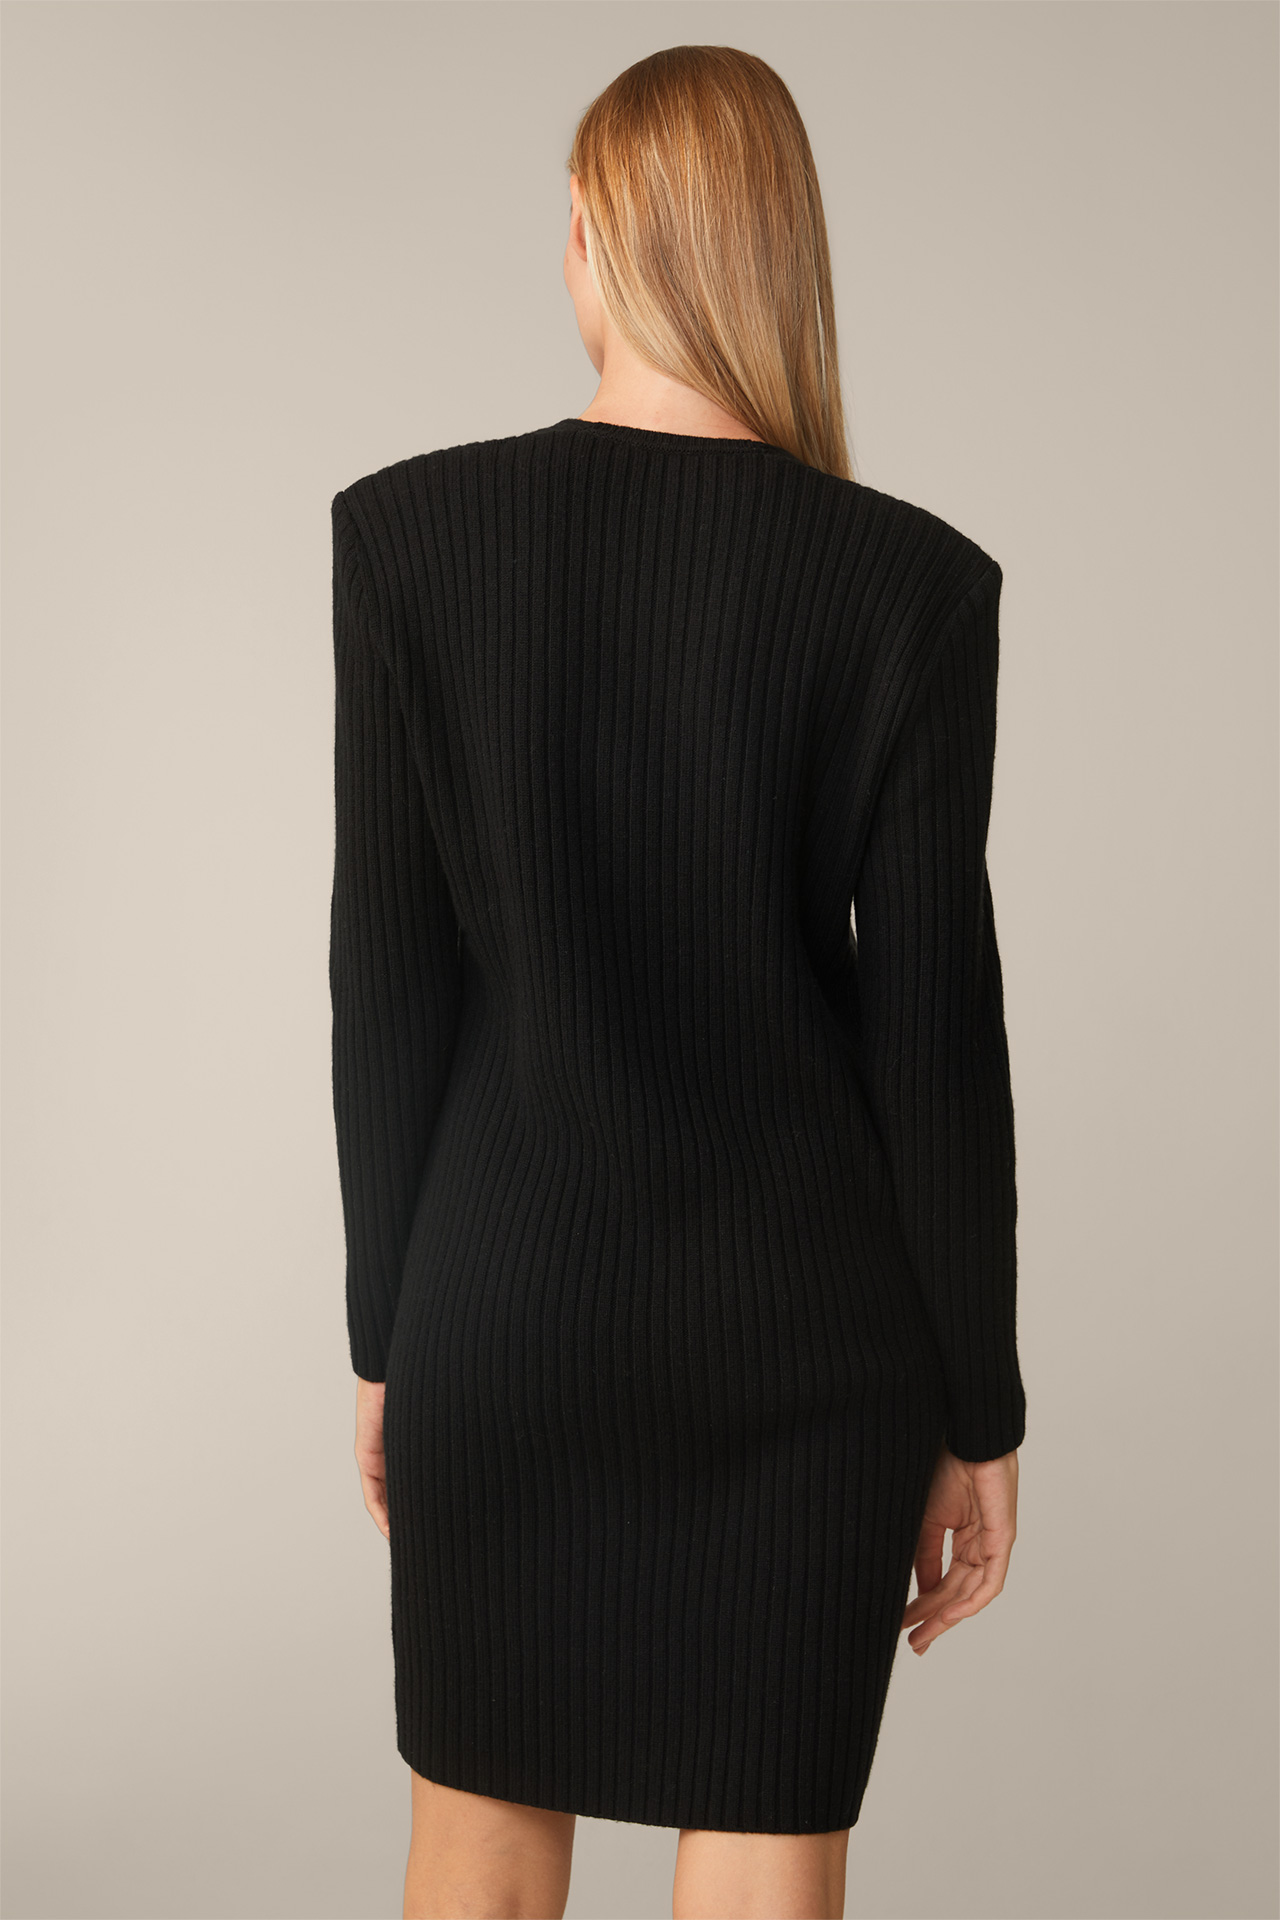 Virgin Wool Cashmere Mix Ribbed Knitted Dress in Black